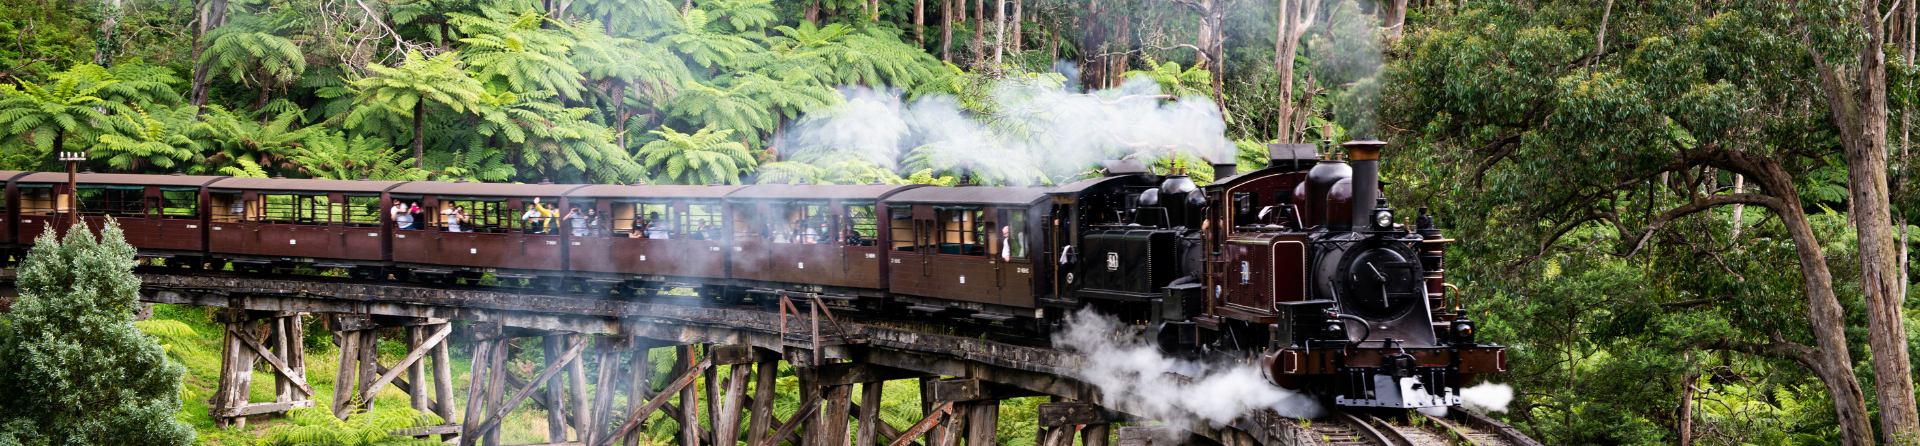 Puffing Billy and Wildlife Tour 9